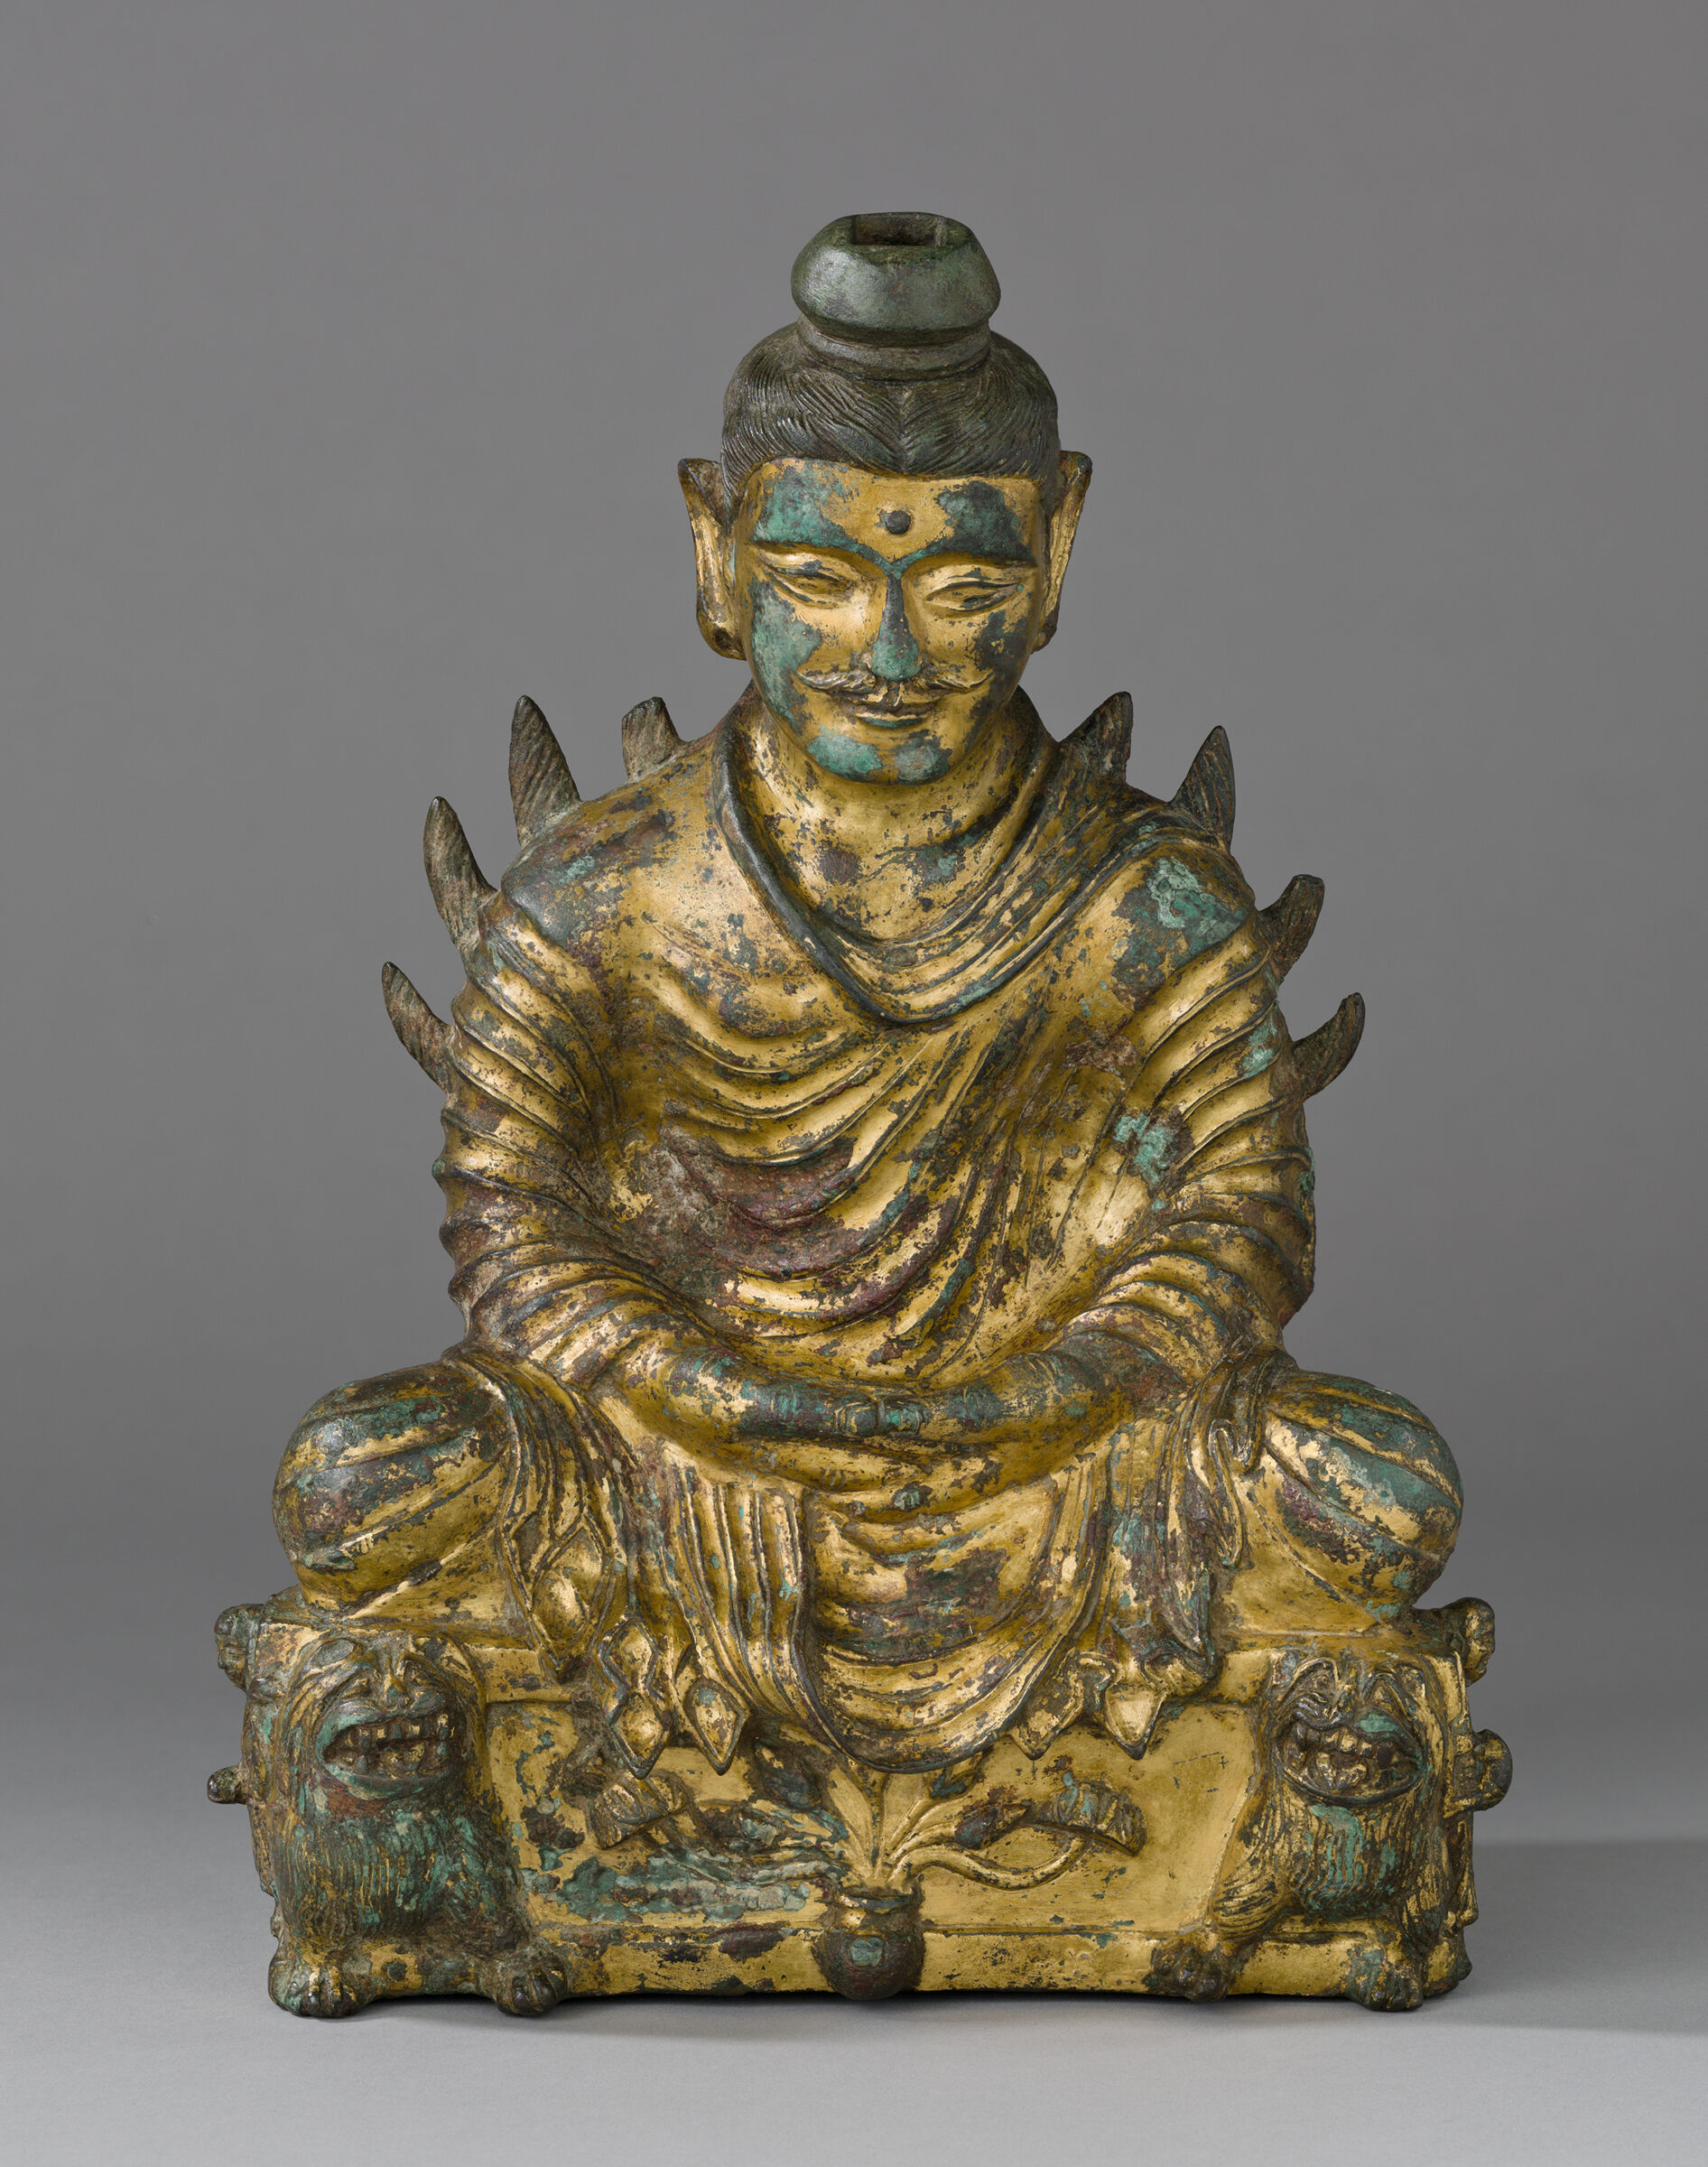 Seated Buddha Shakyamuni In Meditation With Hands In Dhyana-Mudra And With Flaming Shoulders